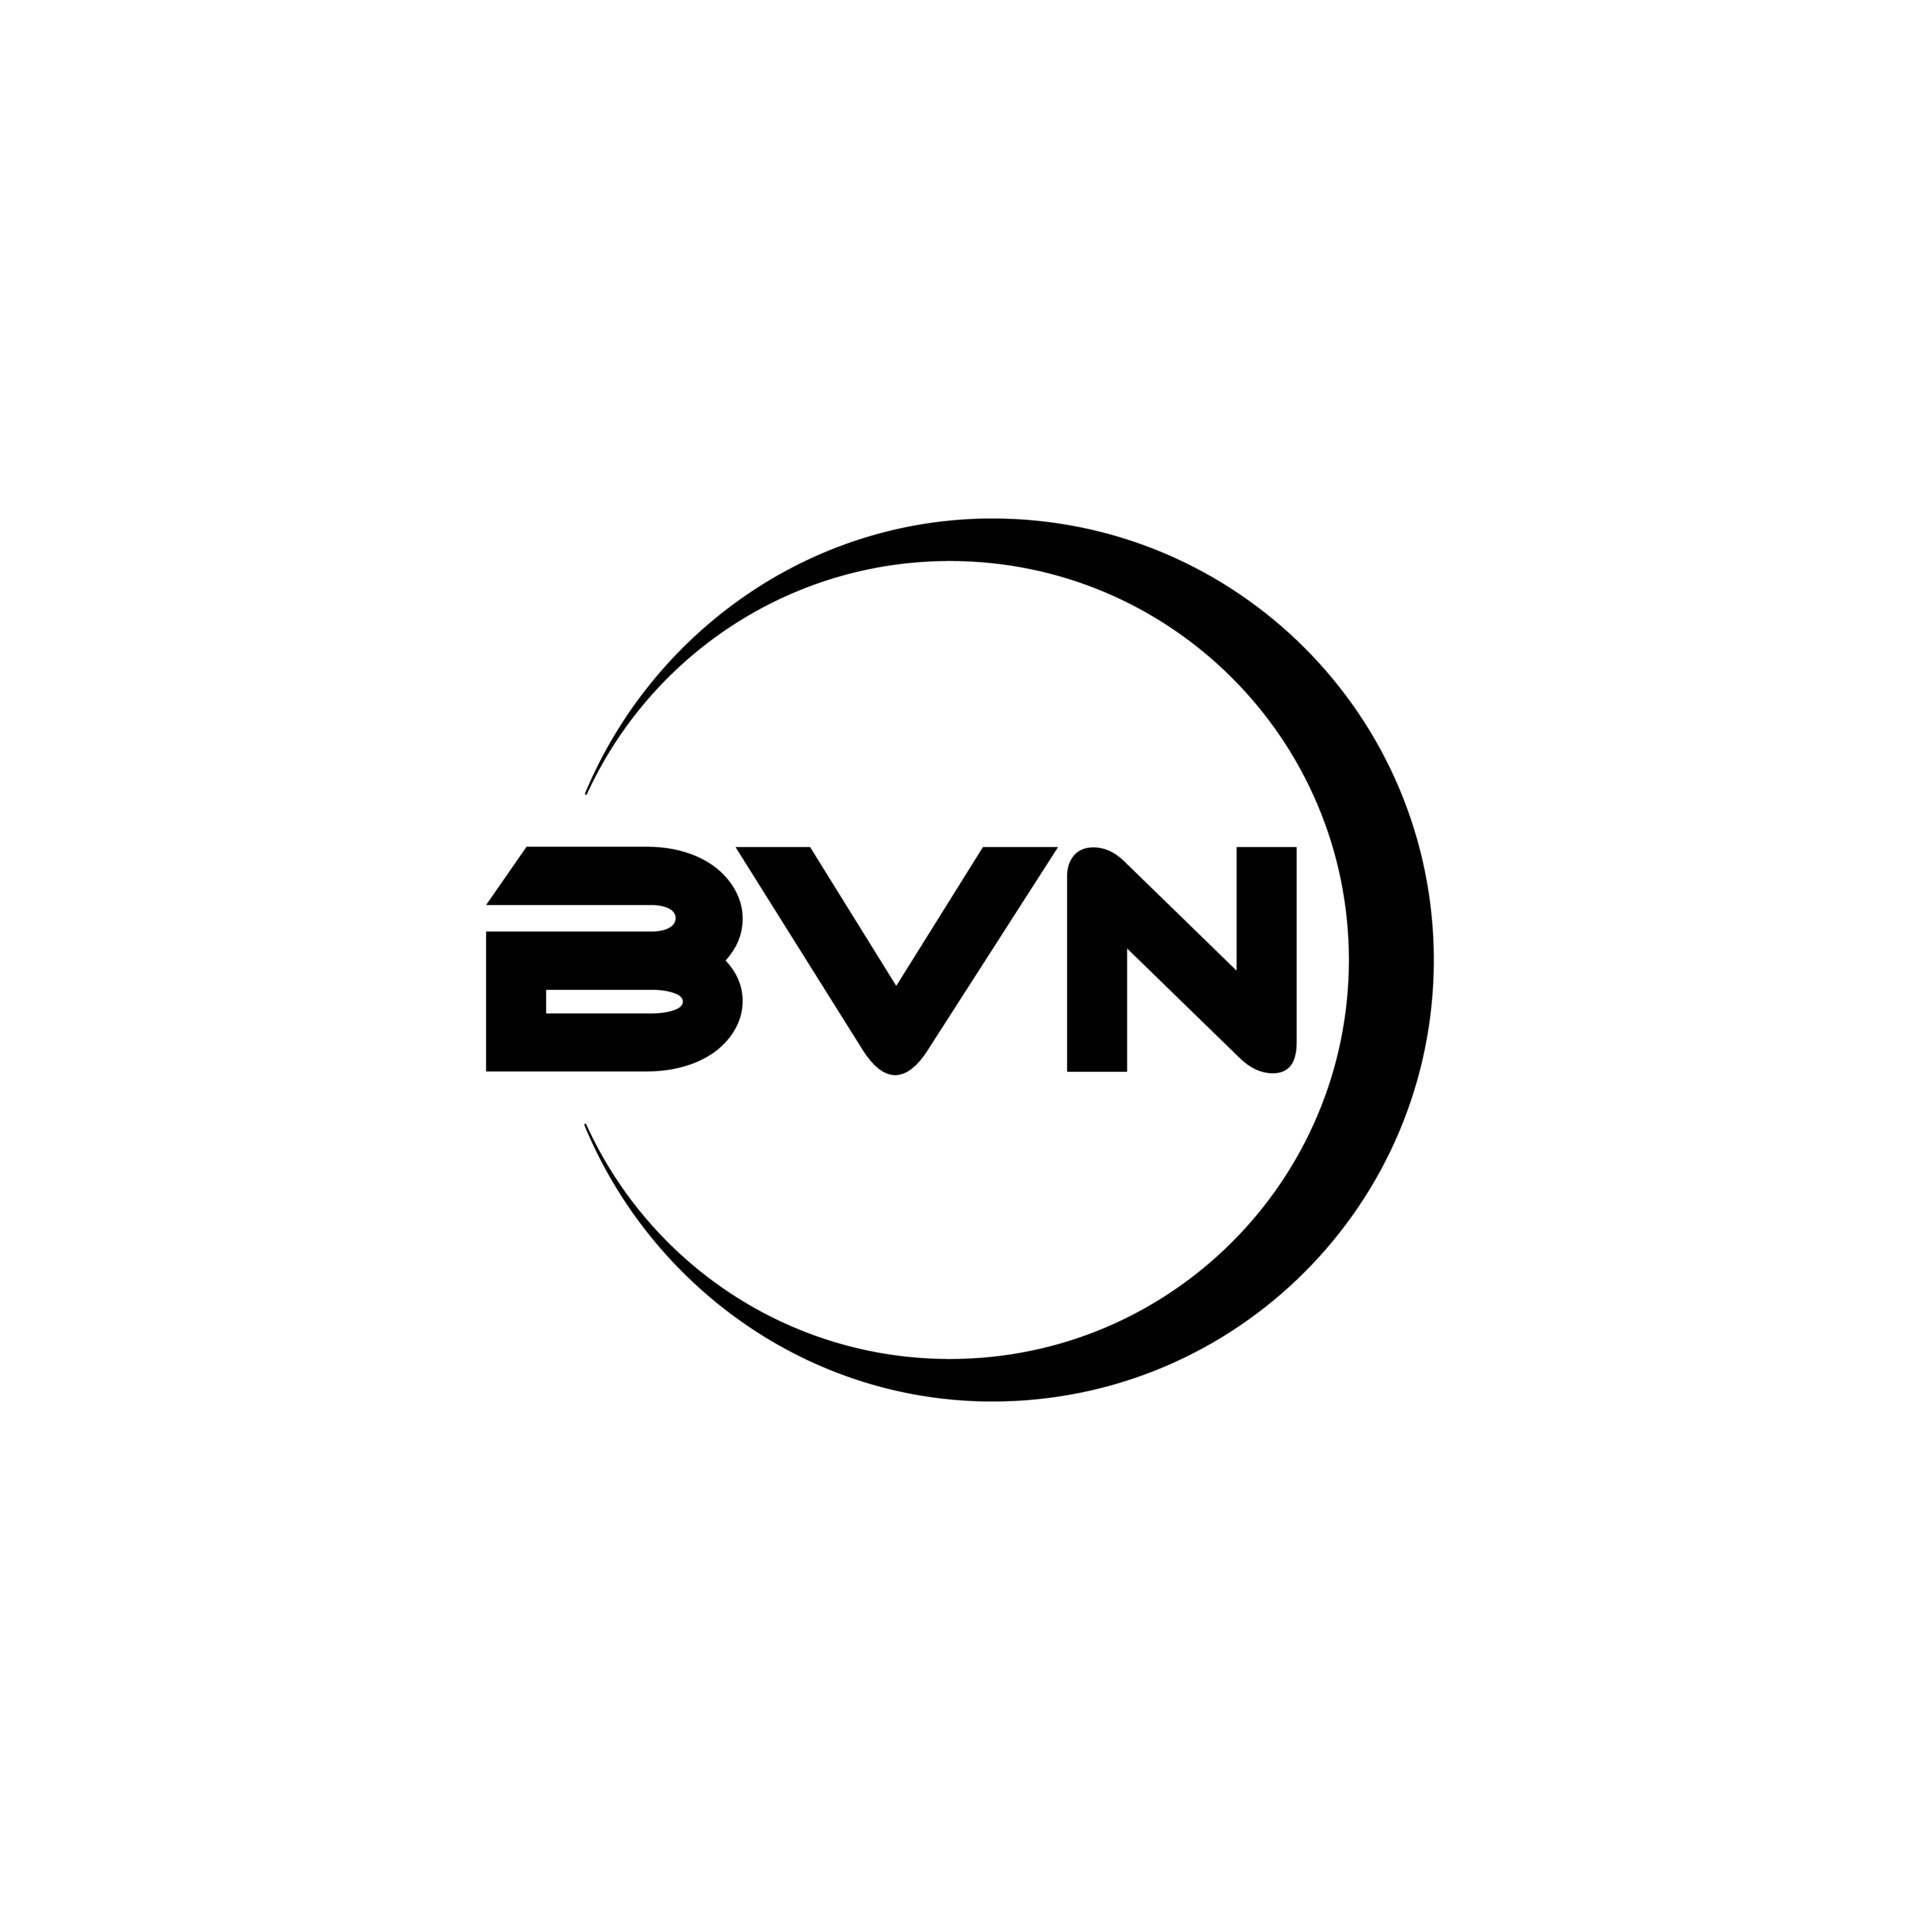 How to Check Your BVN Online